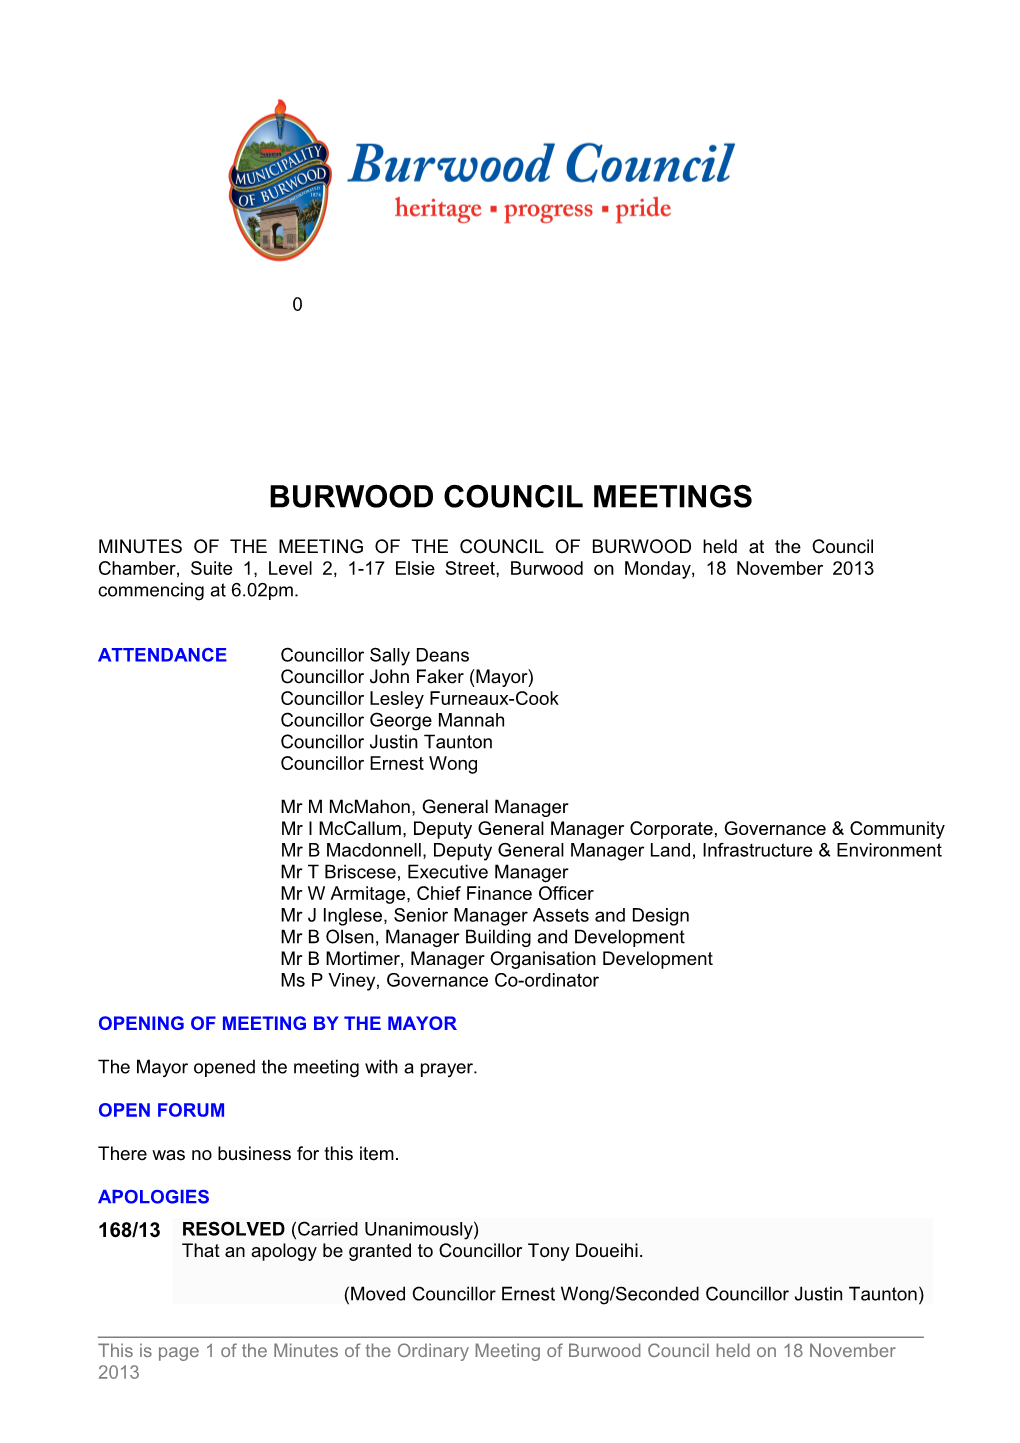 Pro-Forma Minutes of Burwood Council Meetings - 18 November 2013